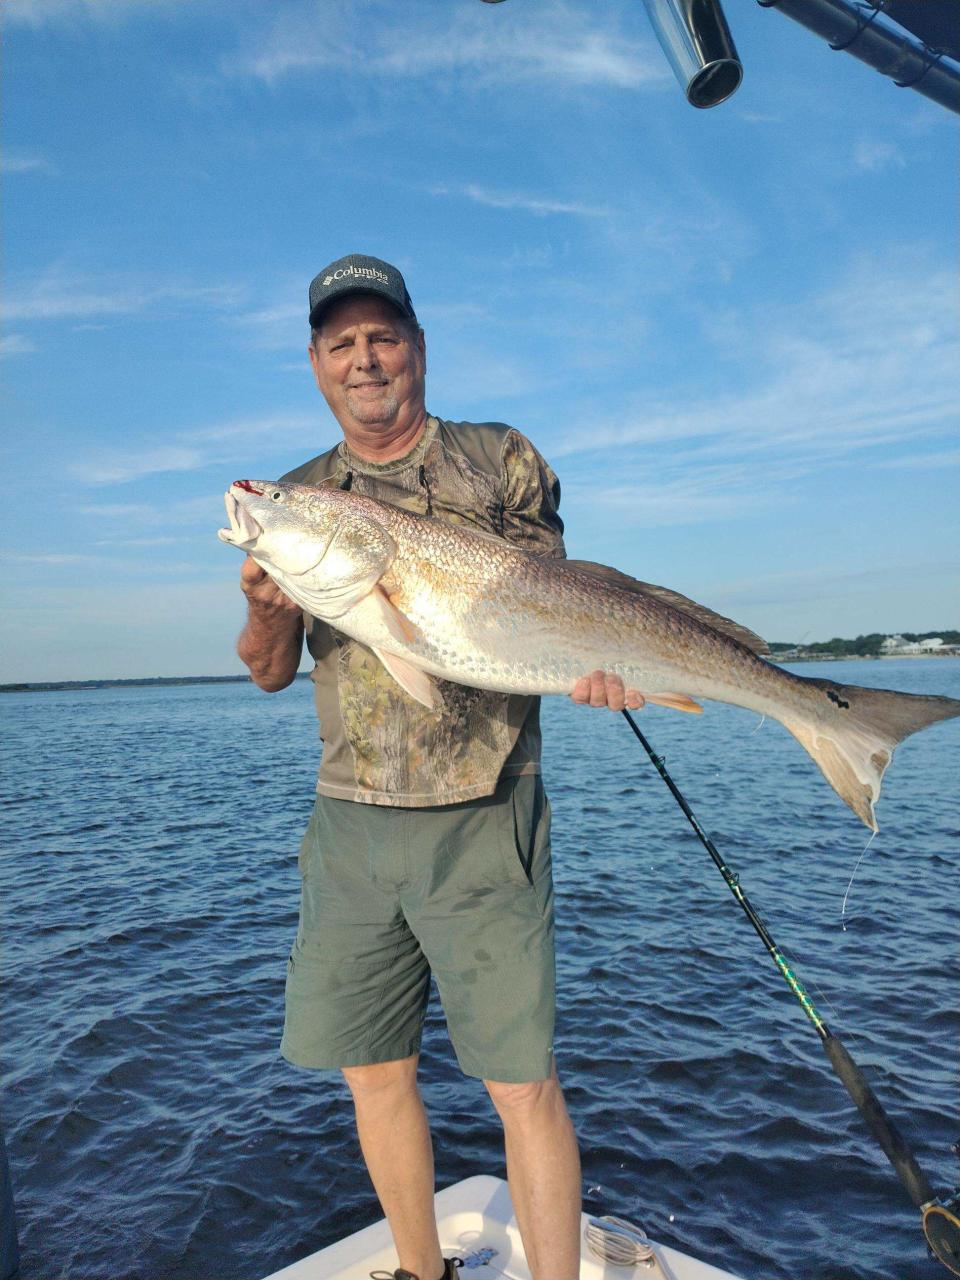 Dennis Scott with a redfish that buried the hand-held scale at 50 pounds. He and Steve West had a banner day recently in the St. Augustine Inlet, catching and releasing about two dozen over-slot reds. They were using blue crab and cut mullet.